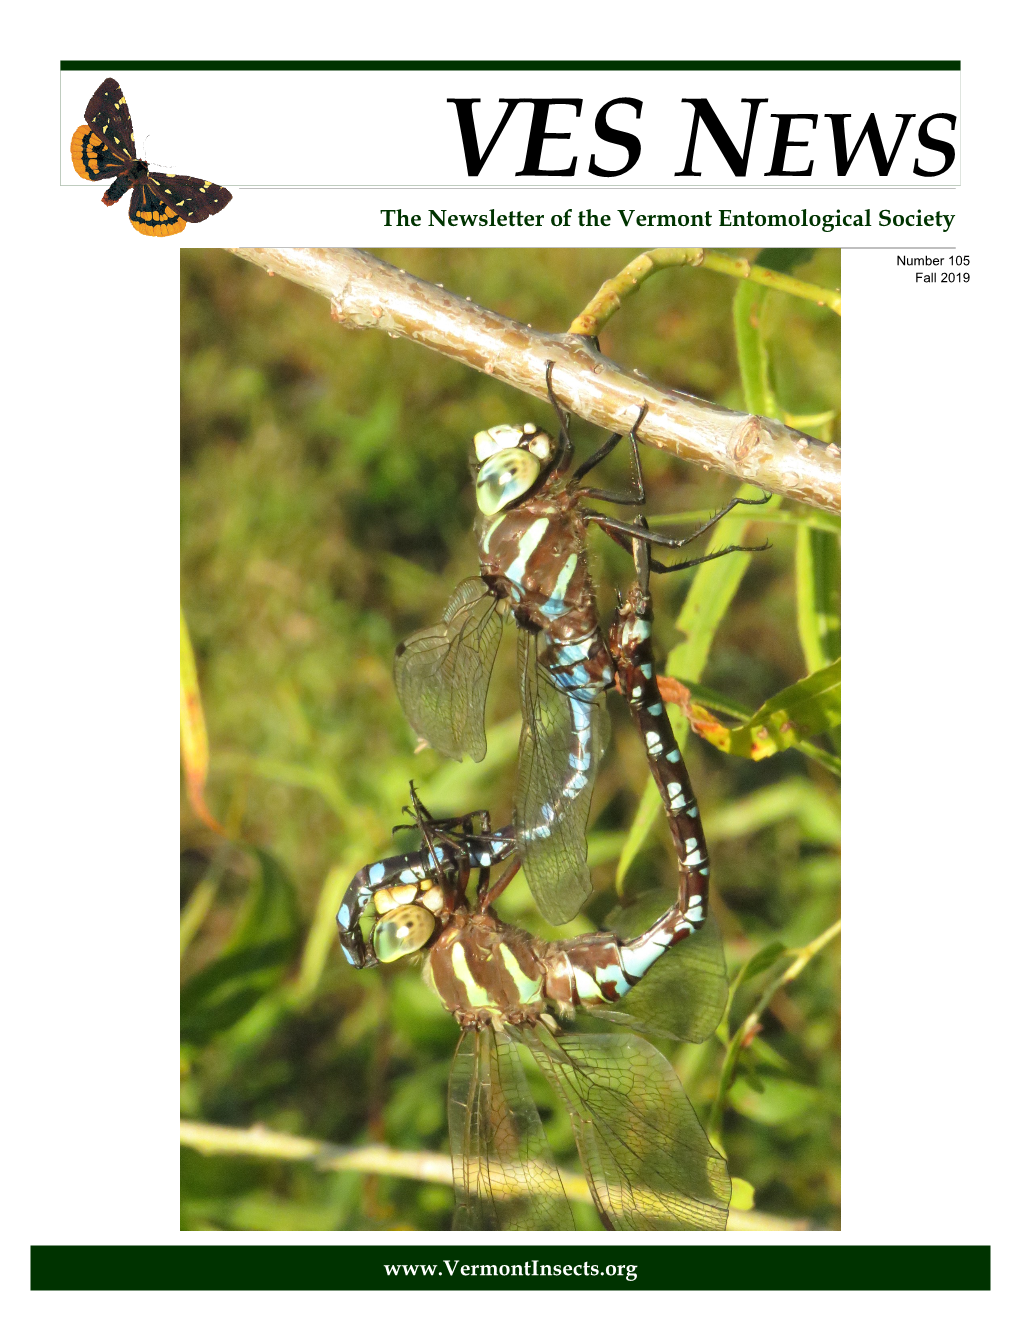 VES NEWS the Newsletter of the Vermont Entomological Society